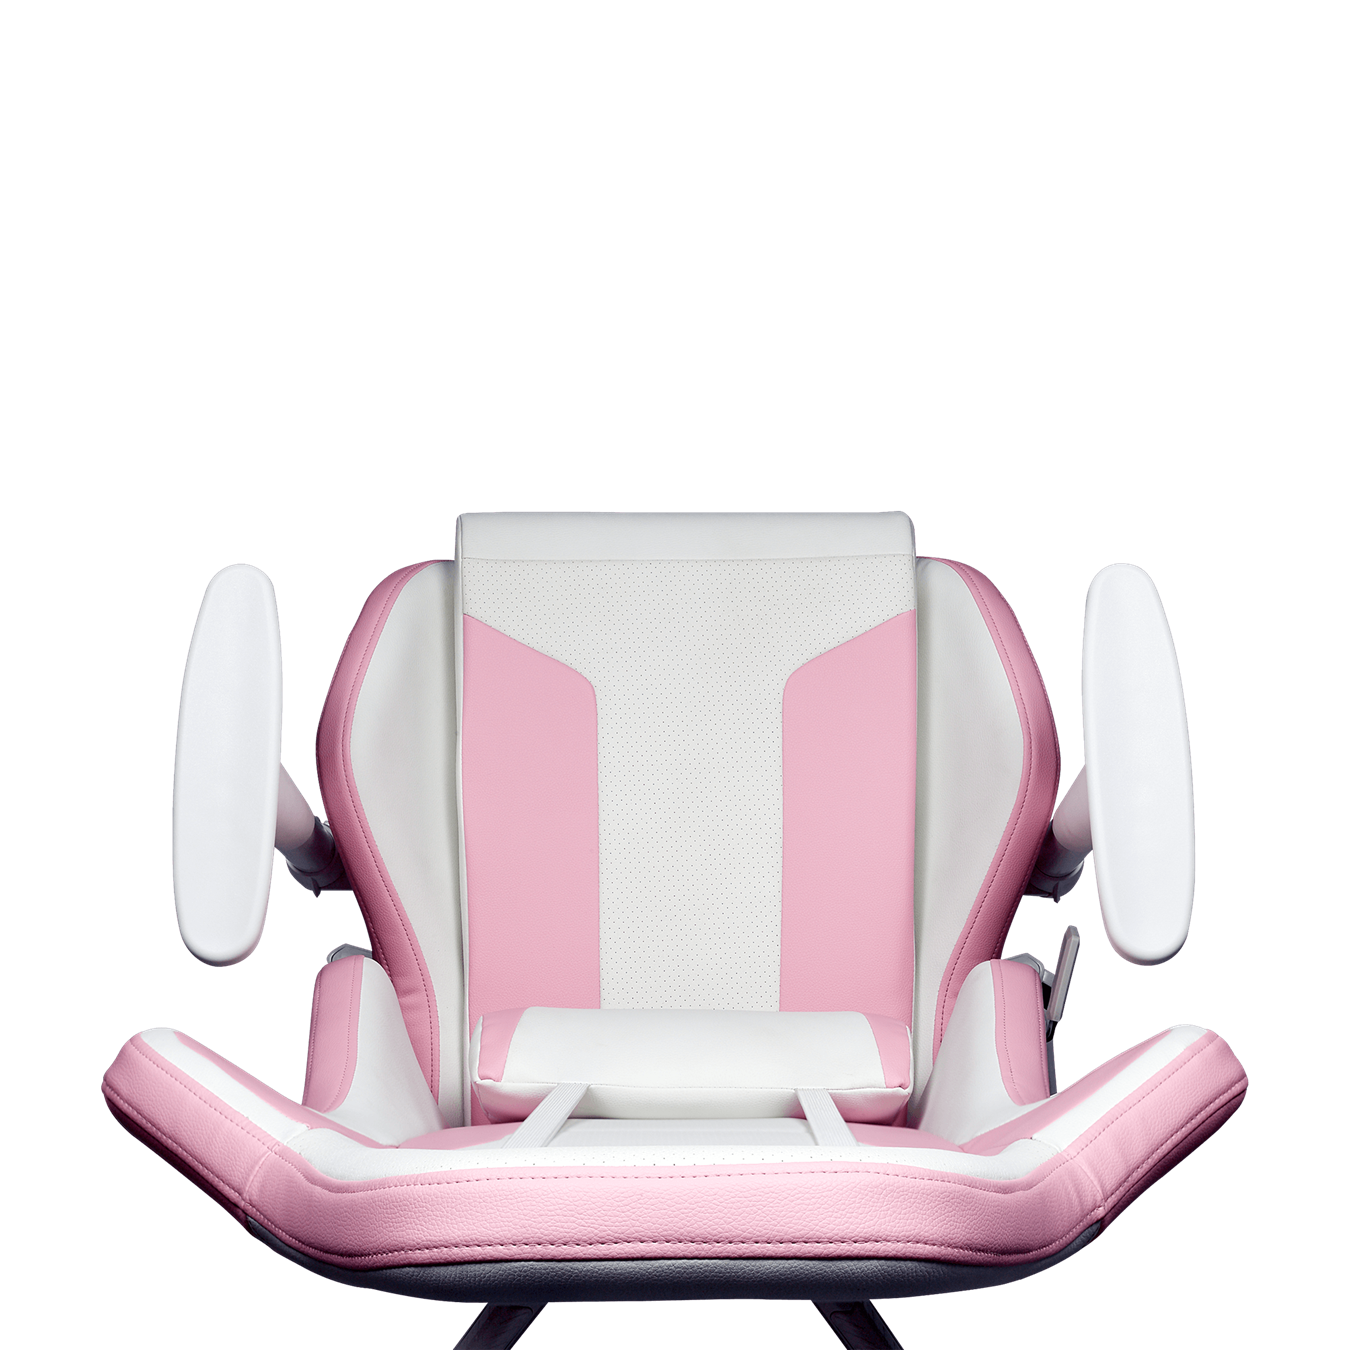 Caliber R1S Rose White Edition Gaming Chair - Top angle view